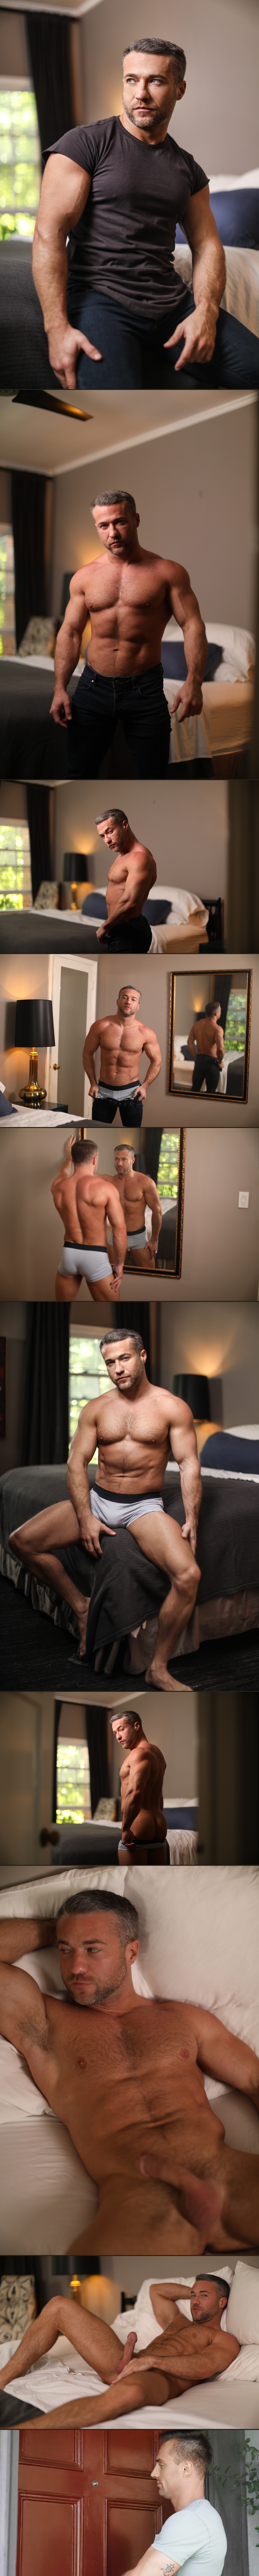 Colby's World (Michael Boston, Colby Melvin and Damien White) at MEN.com